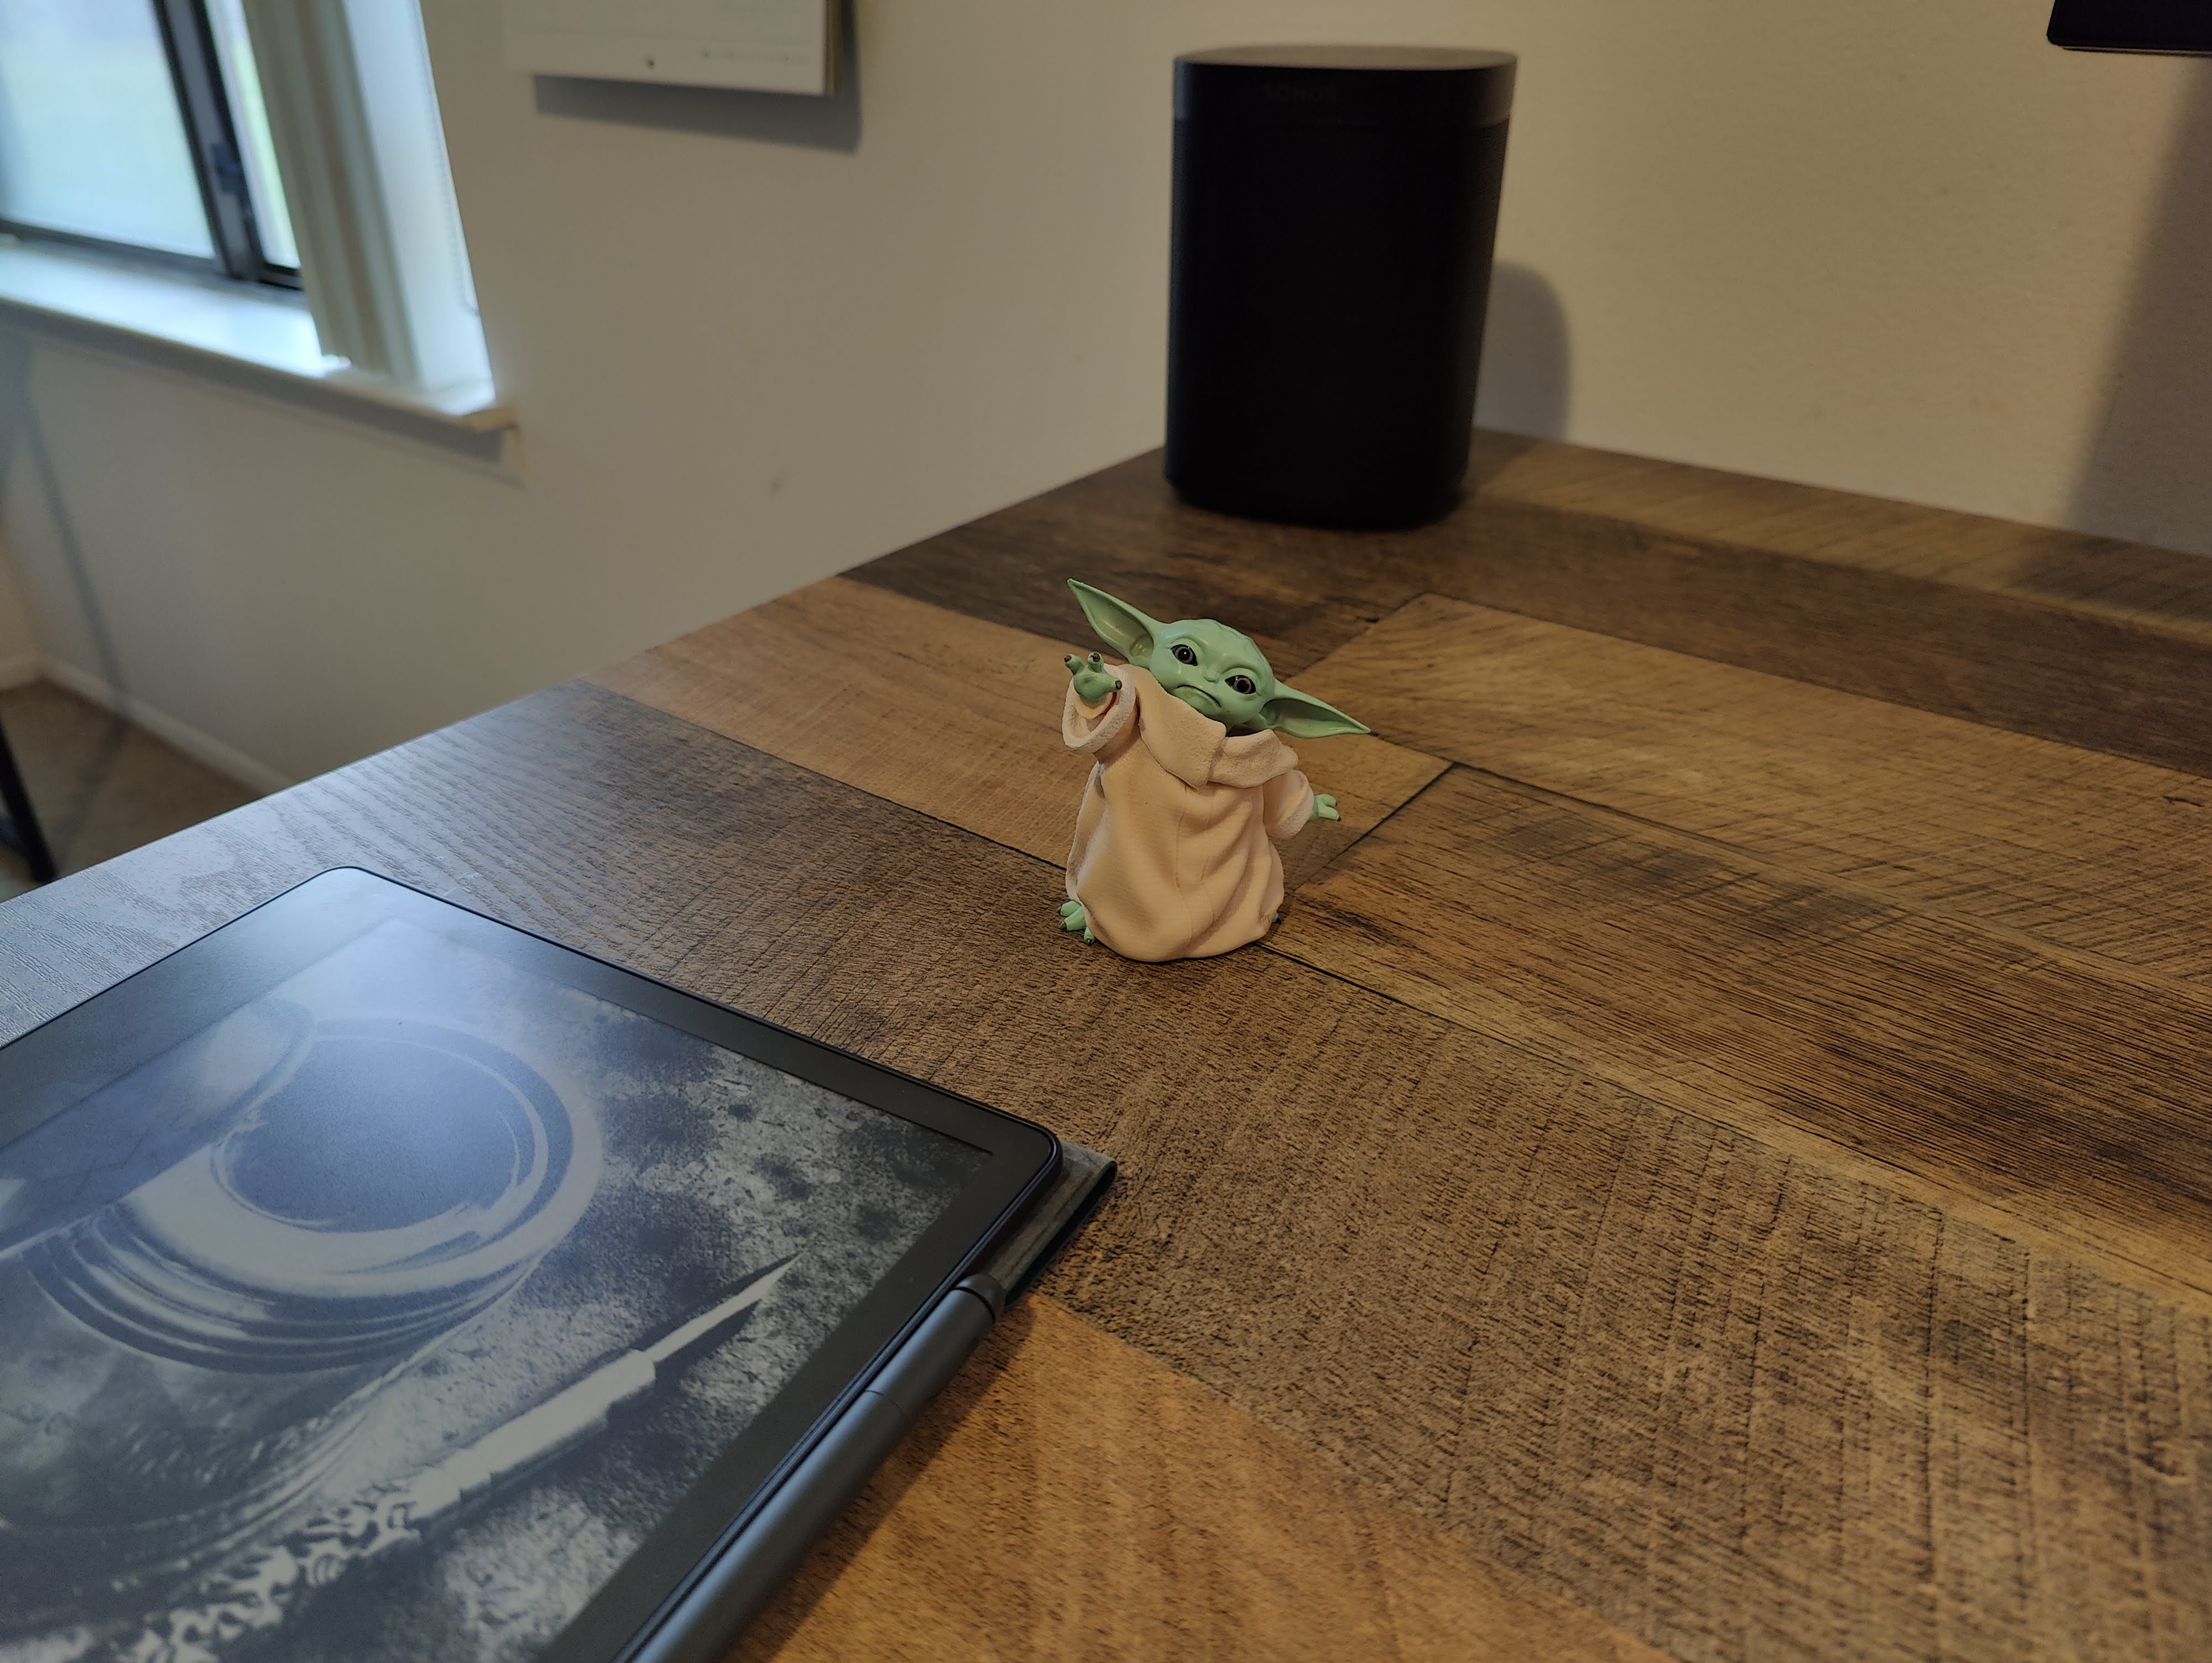 Camera sample from the OnePlus 10 Pro. It's a photo of a small baby Yoda figurine on a desk.